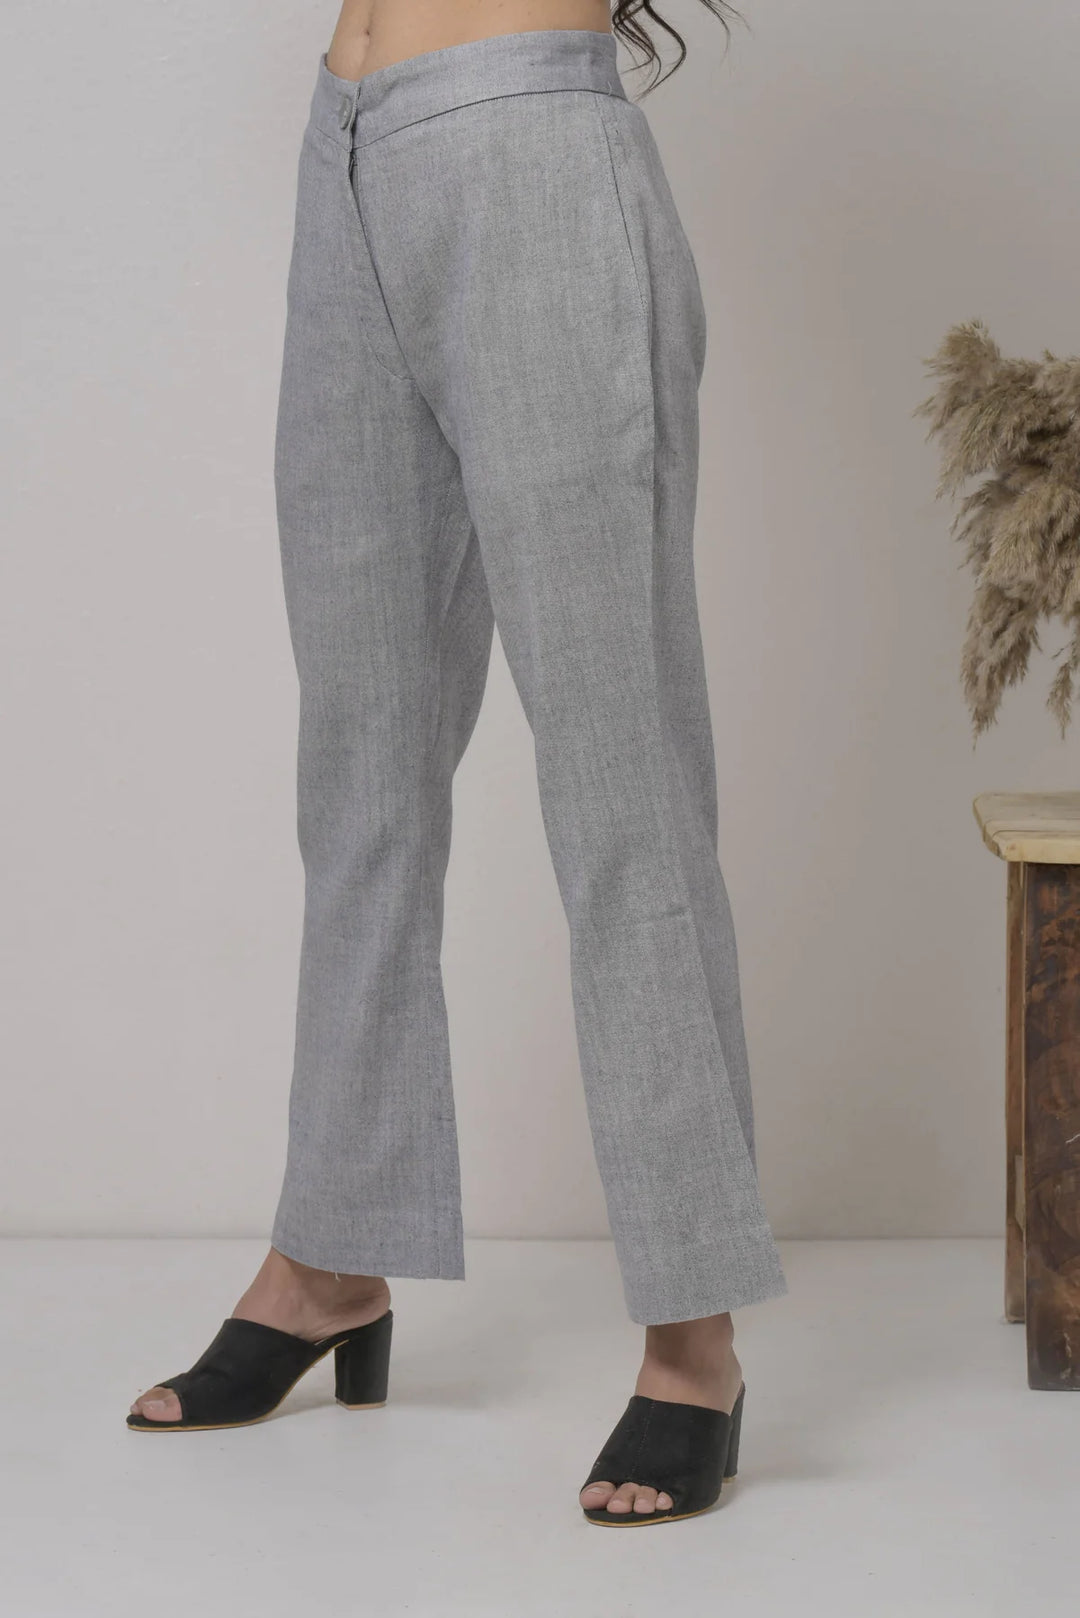 Handwoven Cotton Trousers: Regular Fit, Ankle Length, Care Instructions Included | Mika Handwoven Trousers - Gray